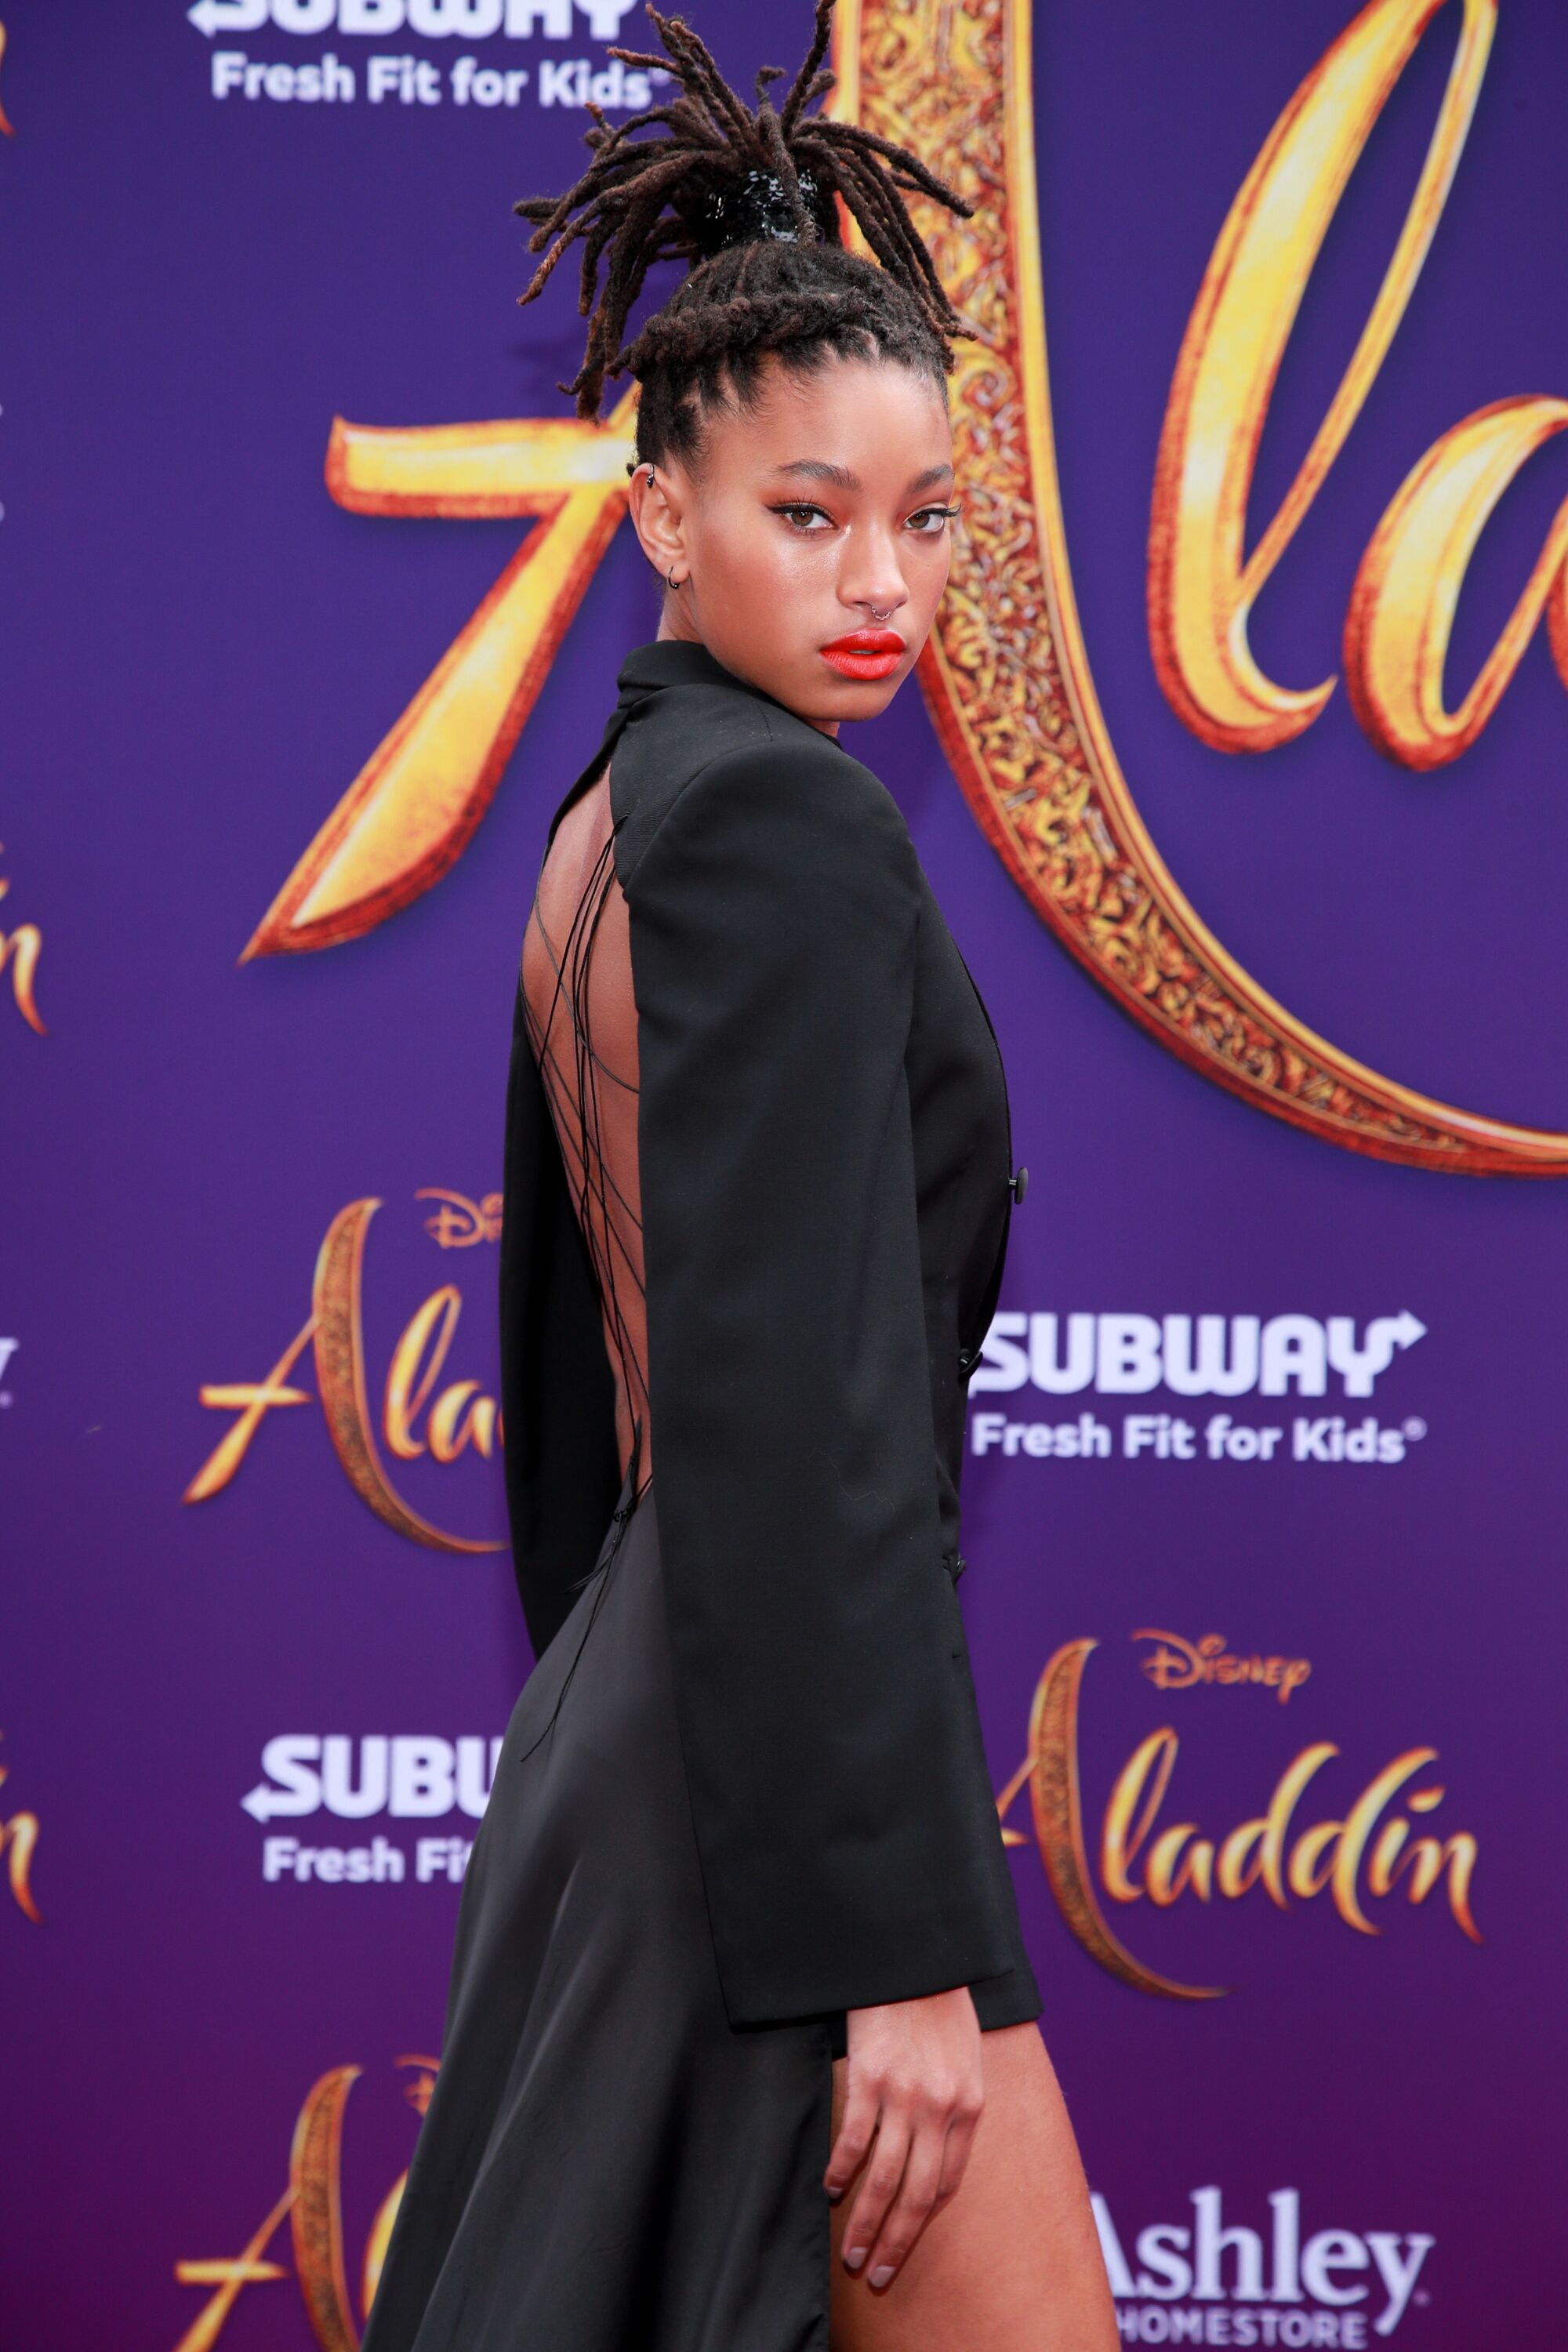 Willow Smith at the premiere of her father Will Smith's hit movie, "Aladdin"/ Source: Getty Images